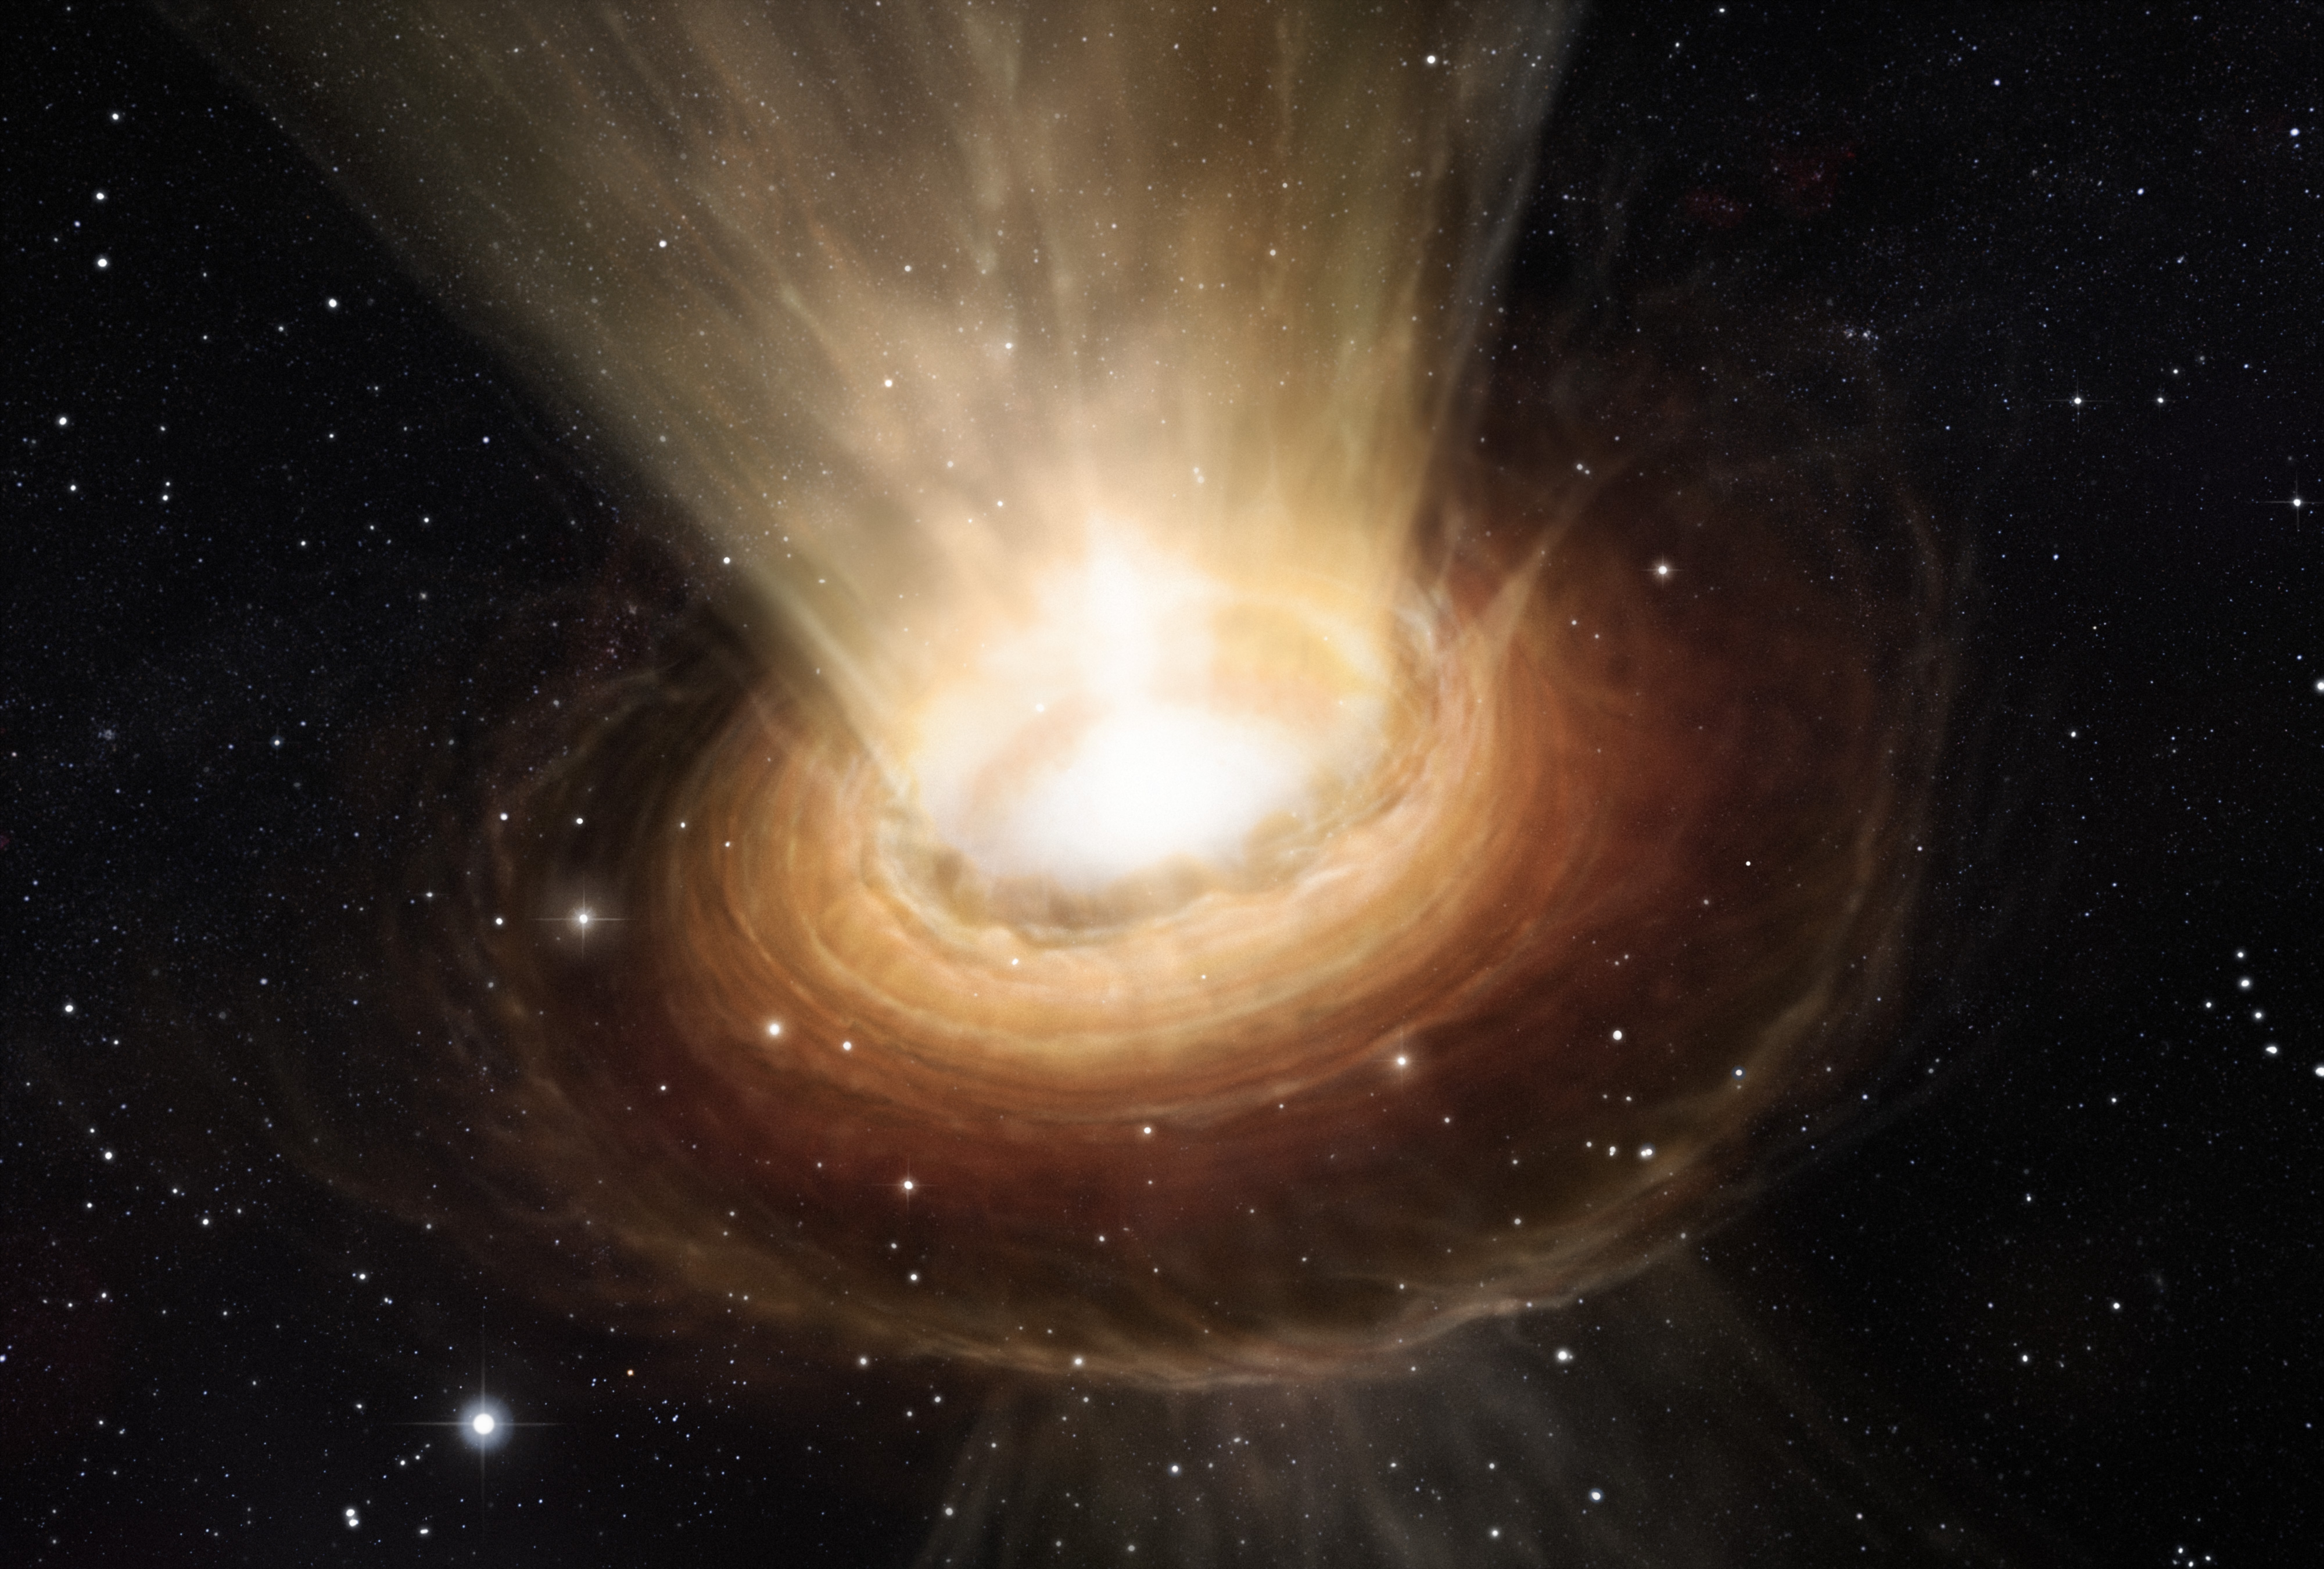 An artist’s impression shows the surroundings of a supermassive black hole at the heart of the active galaxy NGC 3783 in the southern constellation of Centaurus. A new University at Buffalo study finds that information is not lost once it has entered a black hole. Credit: ESO/M. Kornmesser